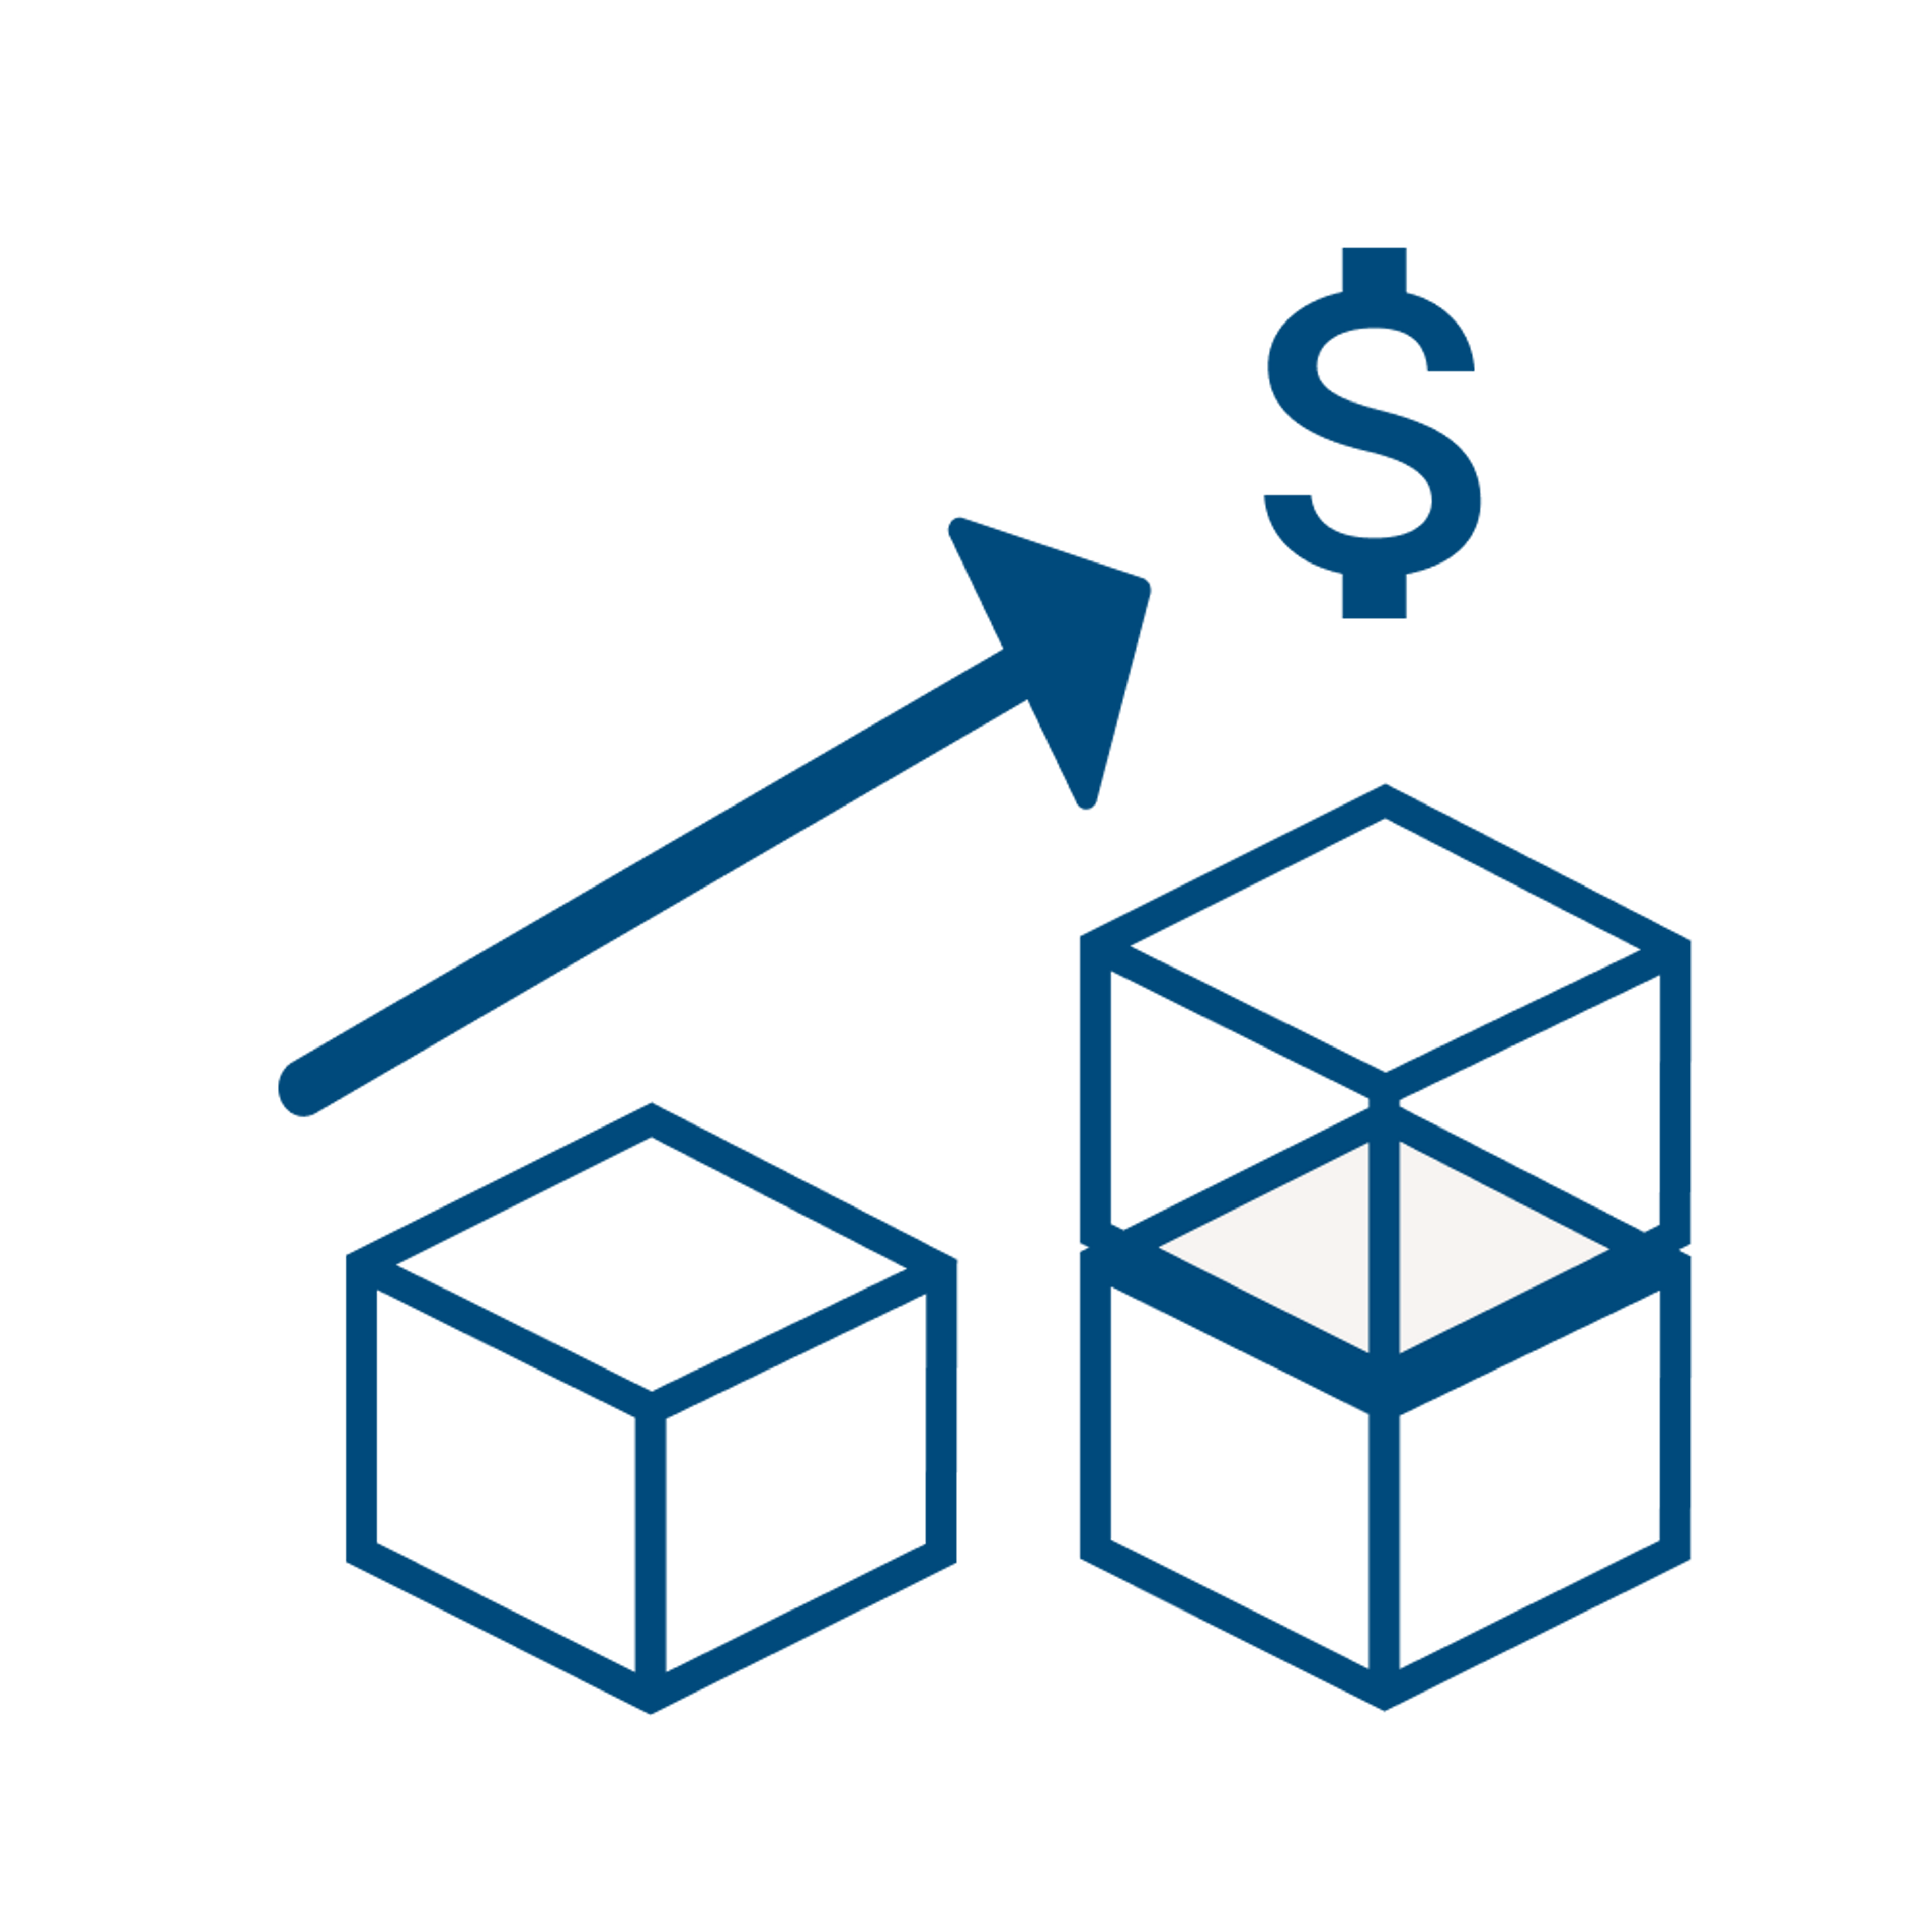 An icon depicting a dollar sign rising above 3D boxes